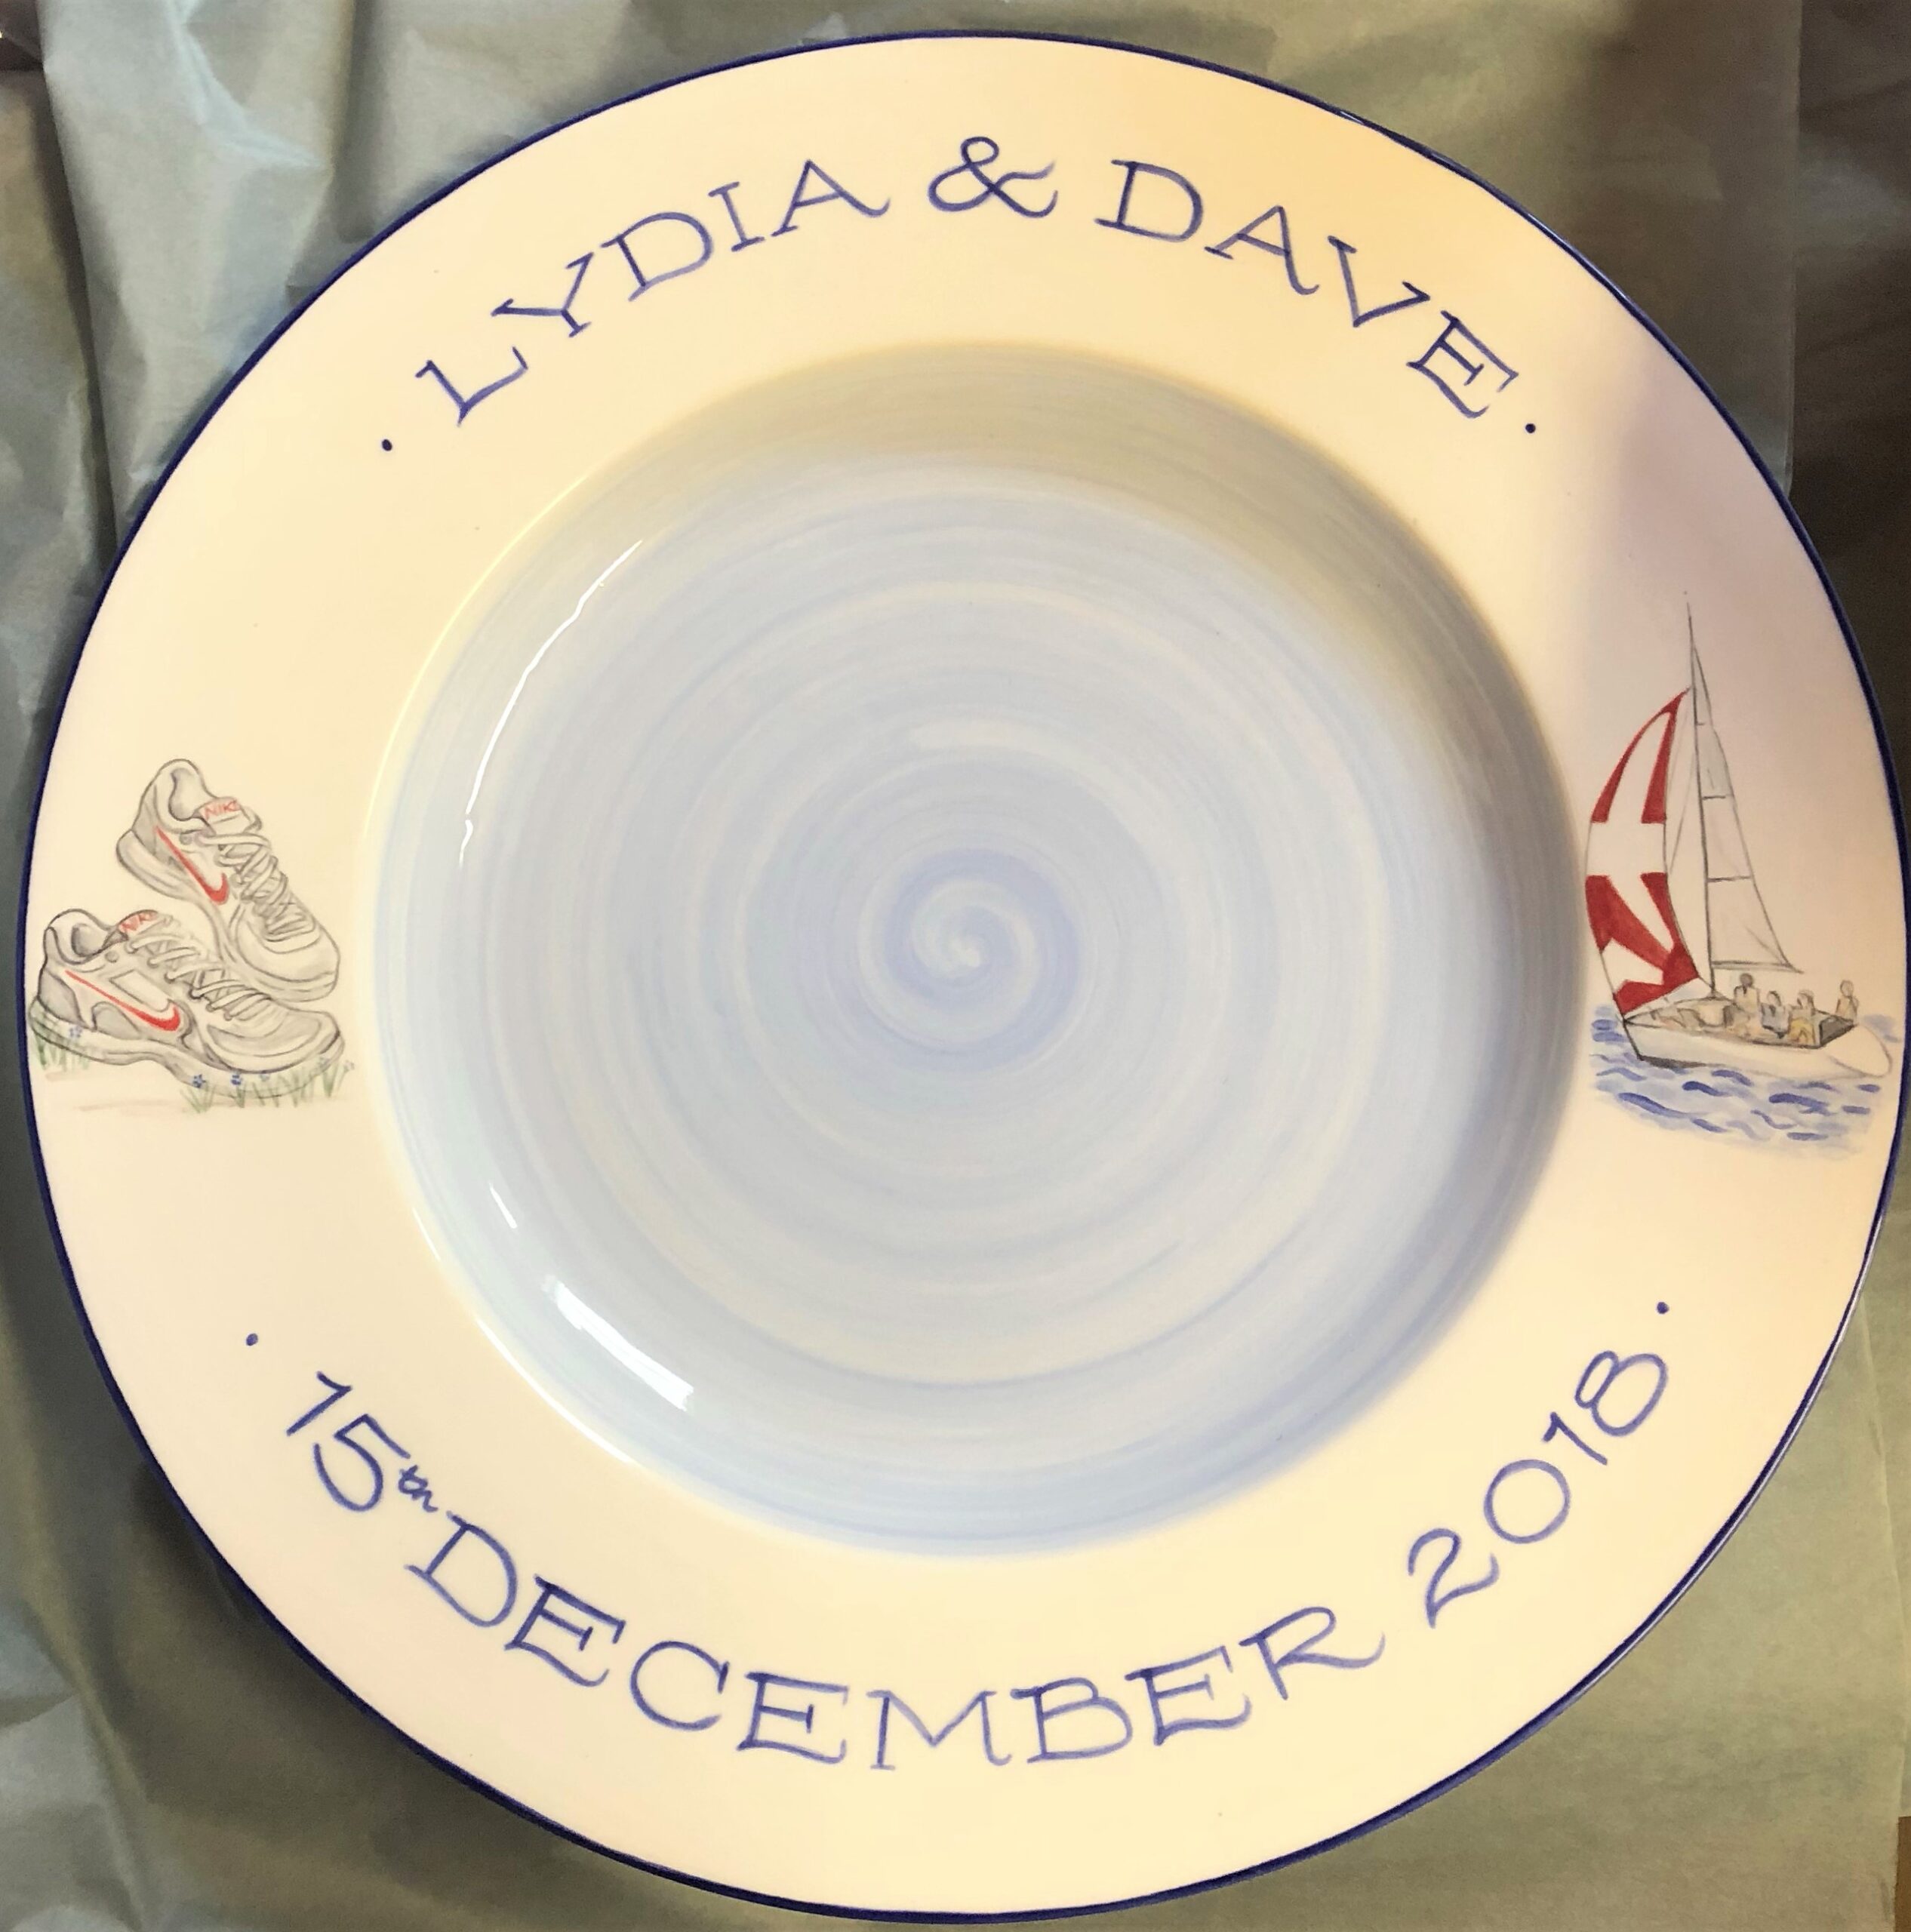 Wedding Signing Plate, inspired by the bride and groom's hobbies